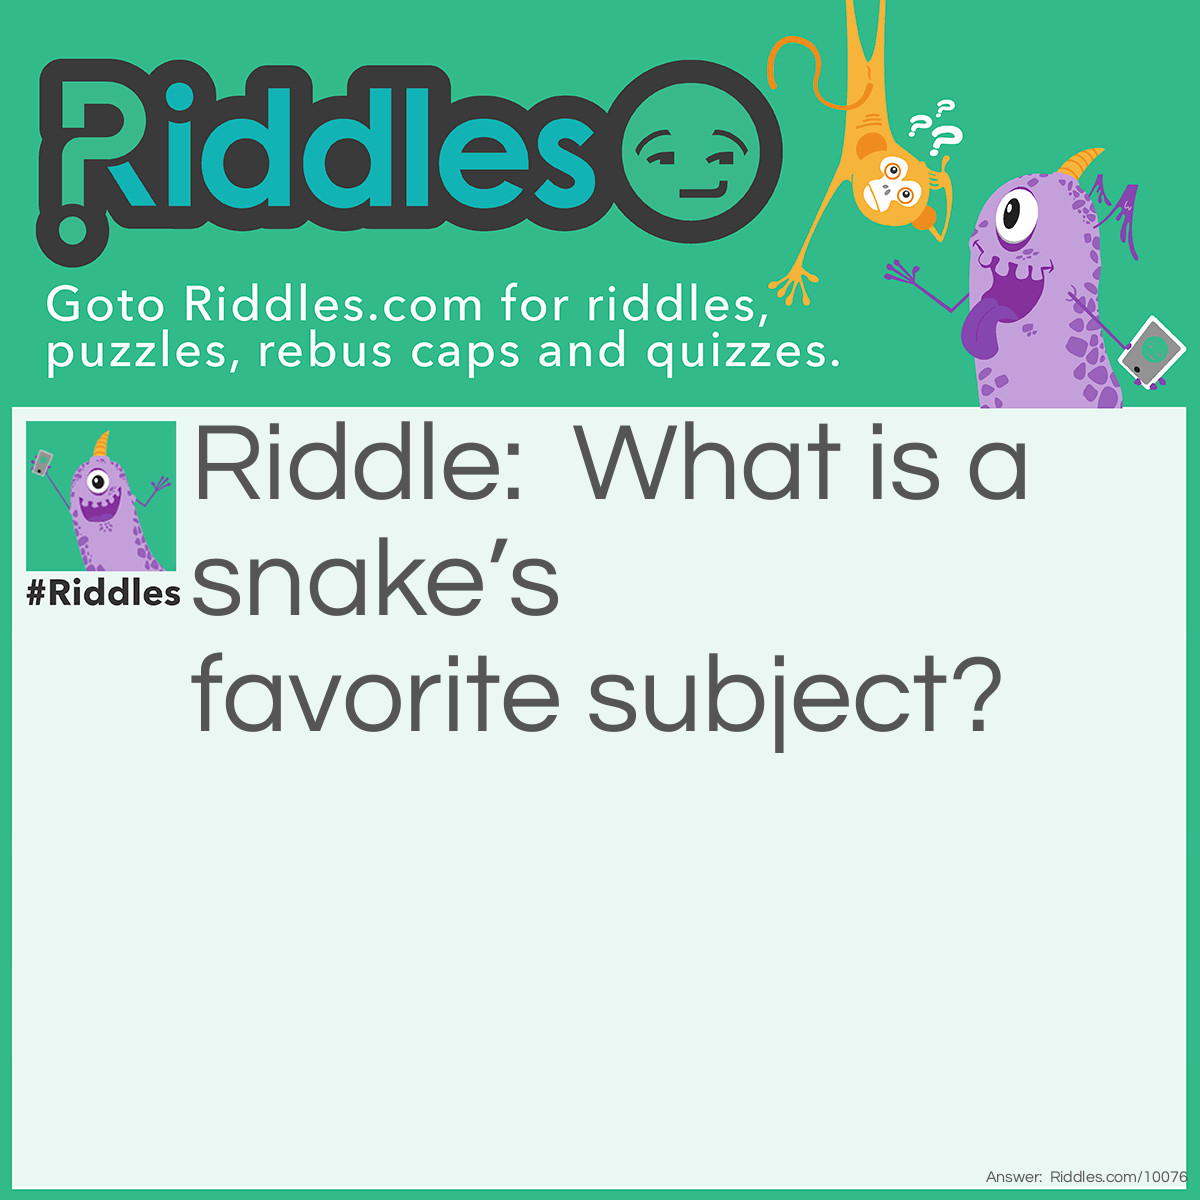 Riddle: What is a snake's favorite subject? Answer: Hisssstory.